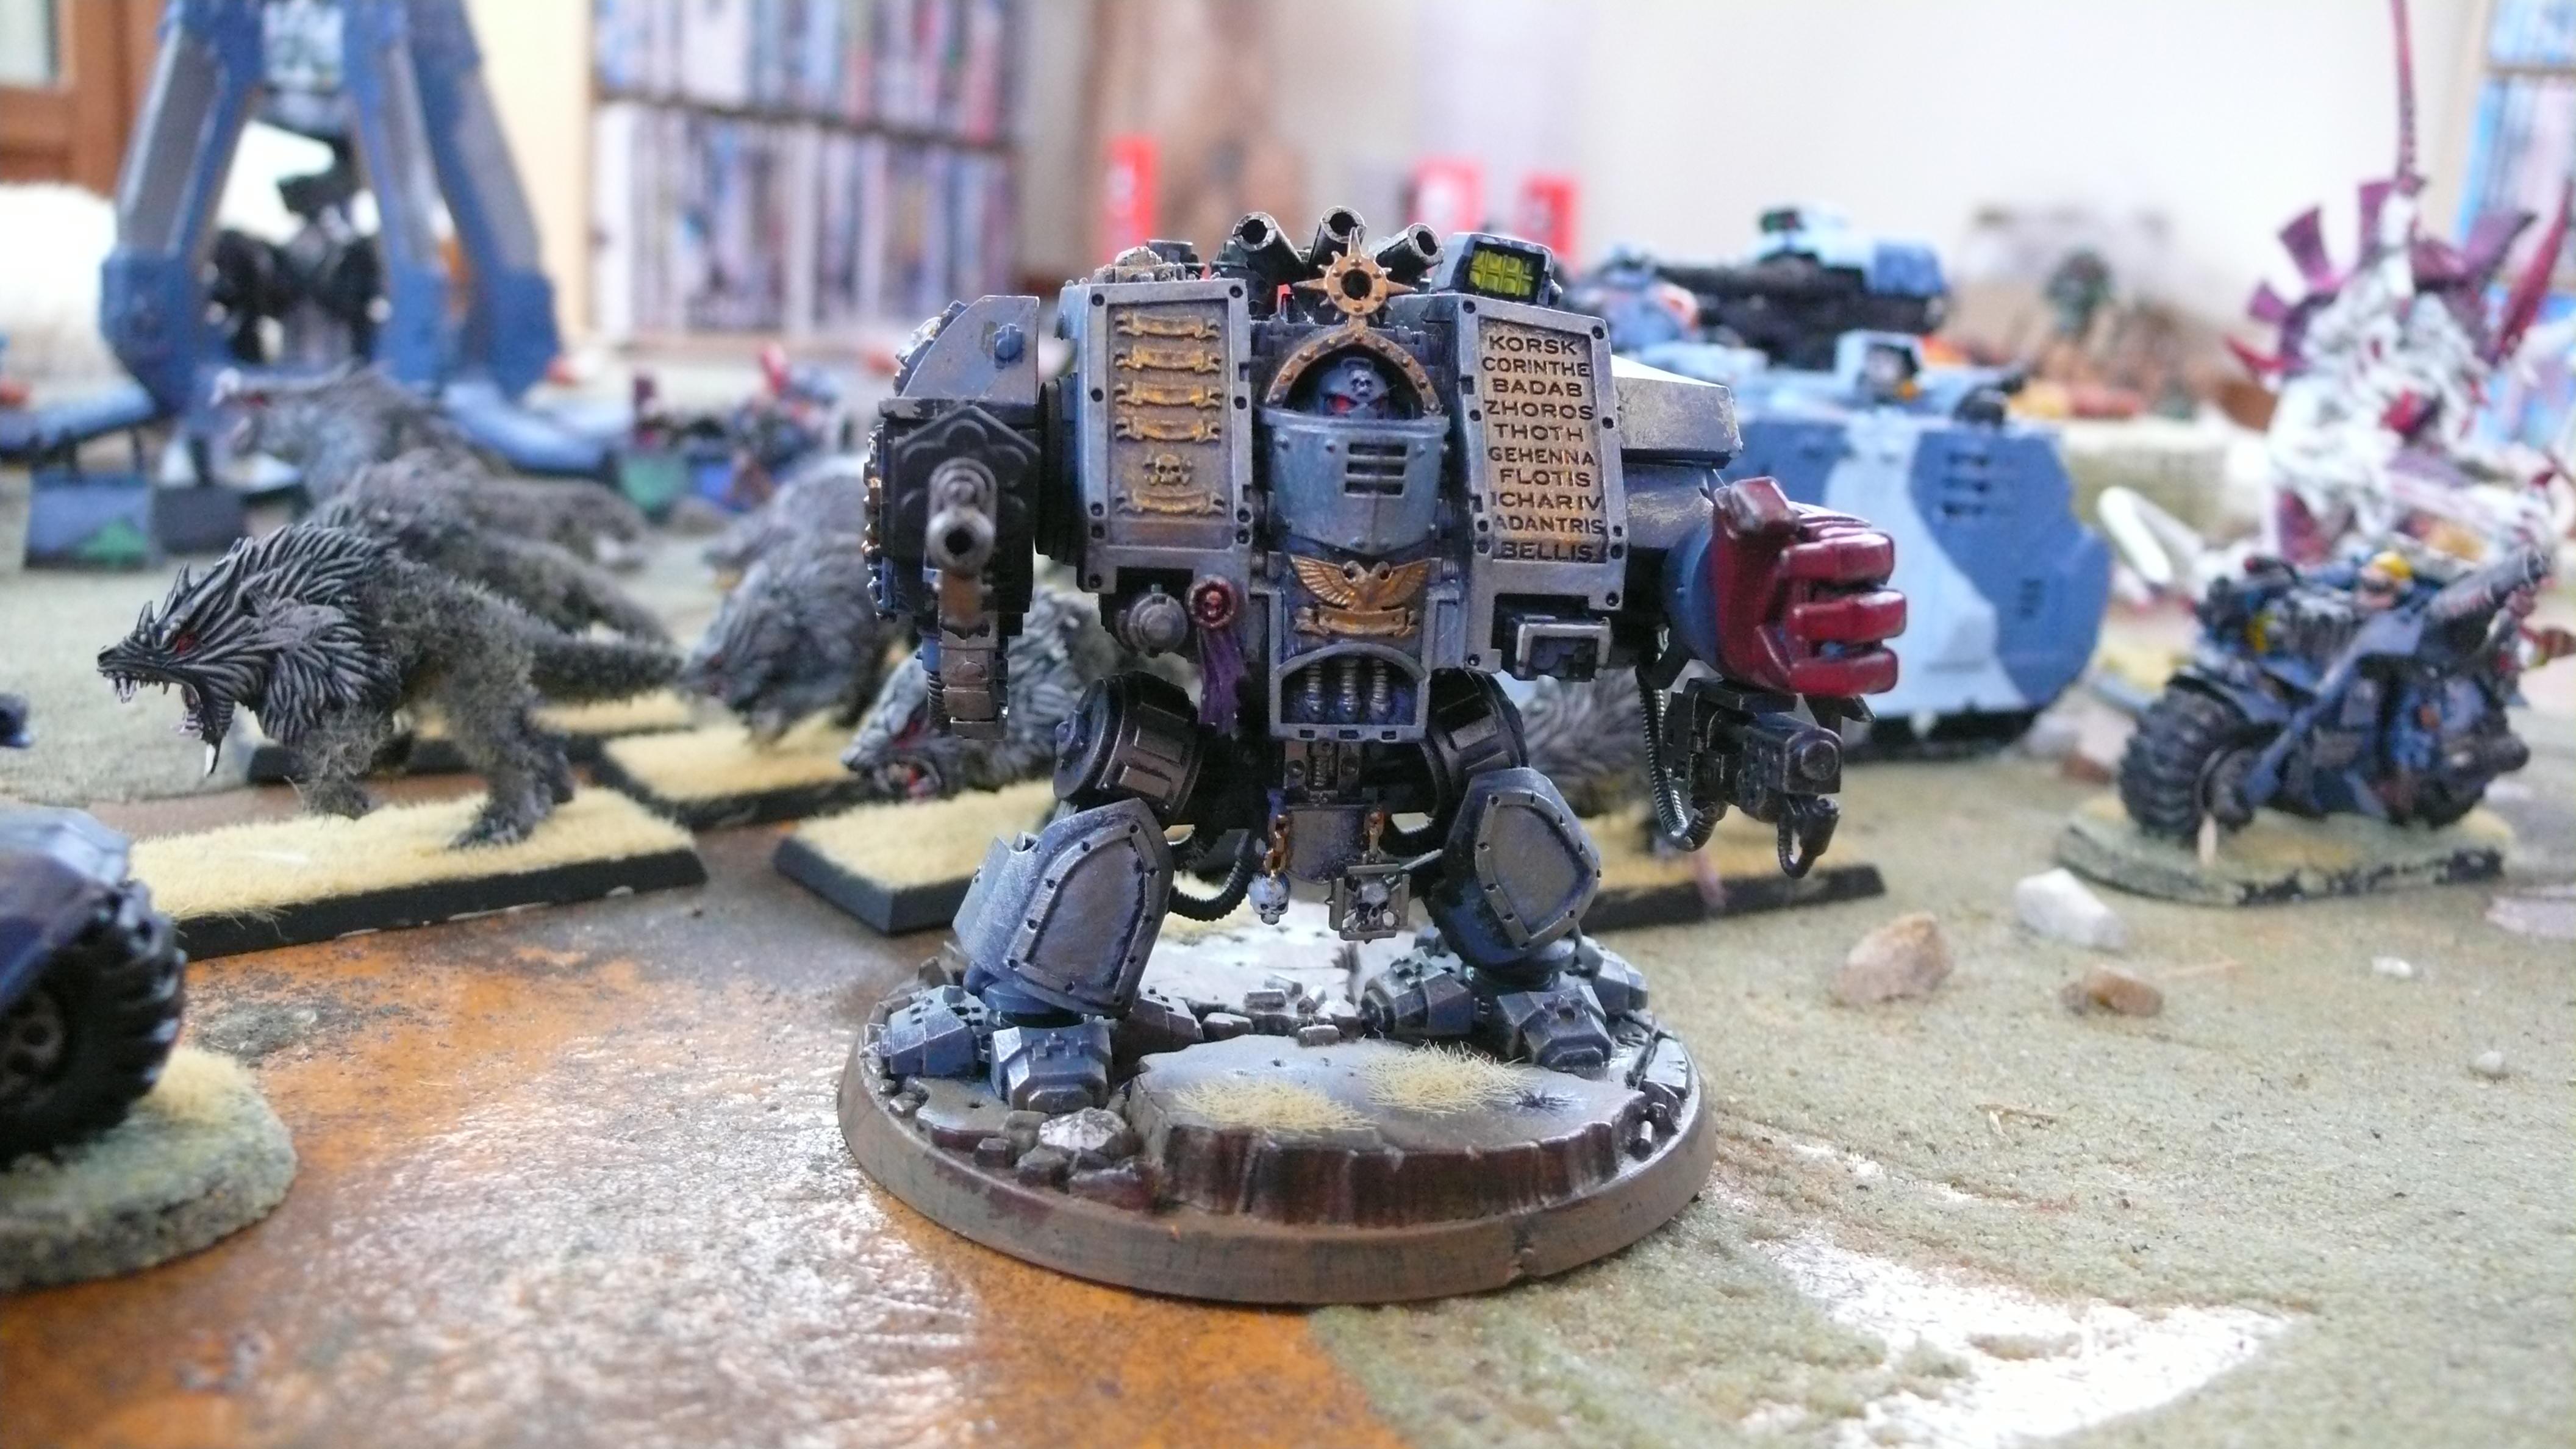 bjorn the fellhanded